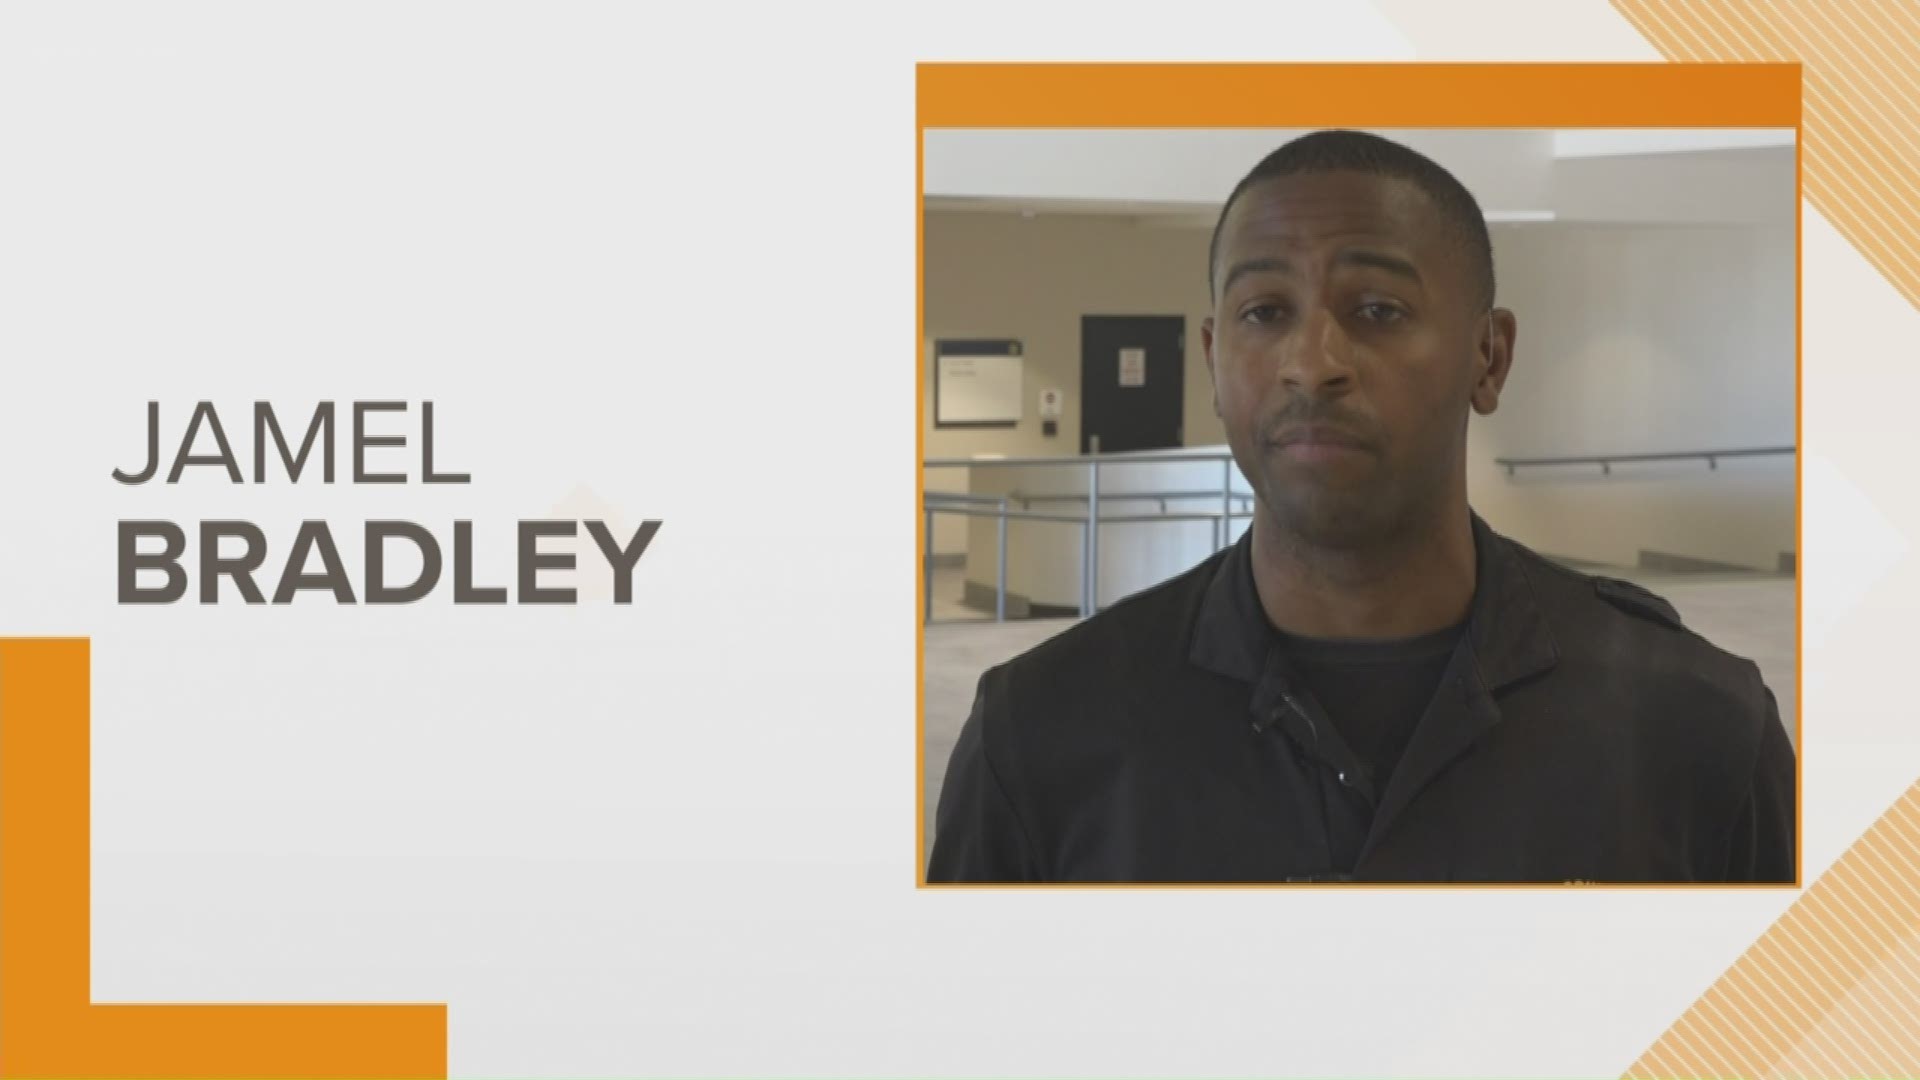 Jamel Bradley is accused in a lawsuit of inappropriately touching a student at Spring Valley High student.